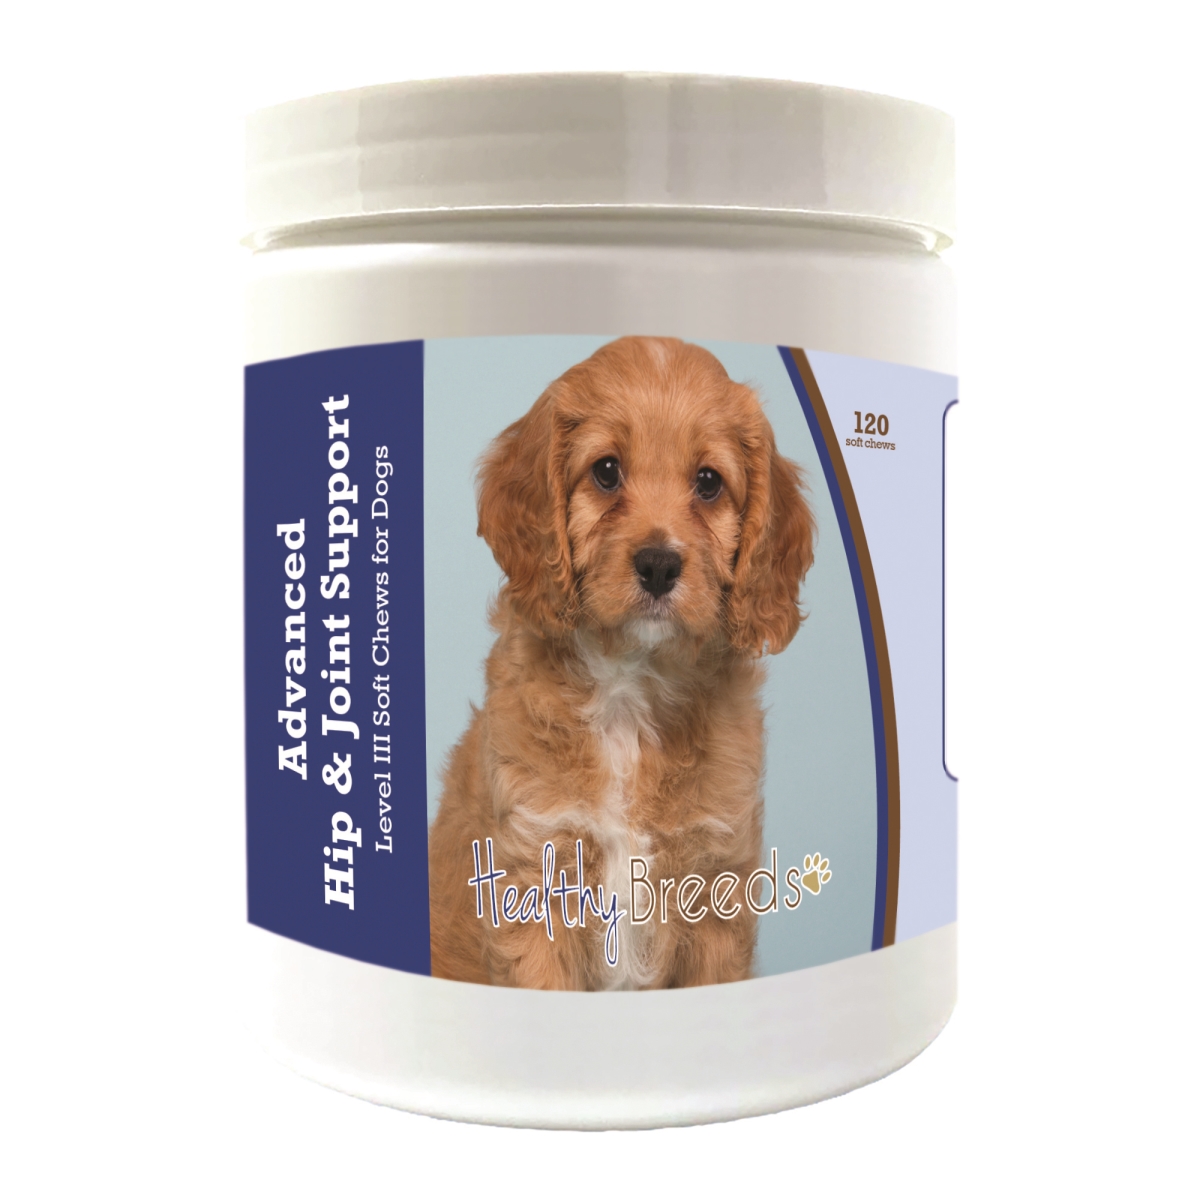 Picture of Healthy Breeds 192959897883 Cavapoo Advanced Hip & Joint Support Level III Soft Chews for Dogs